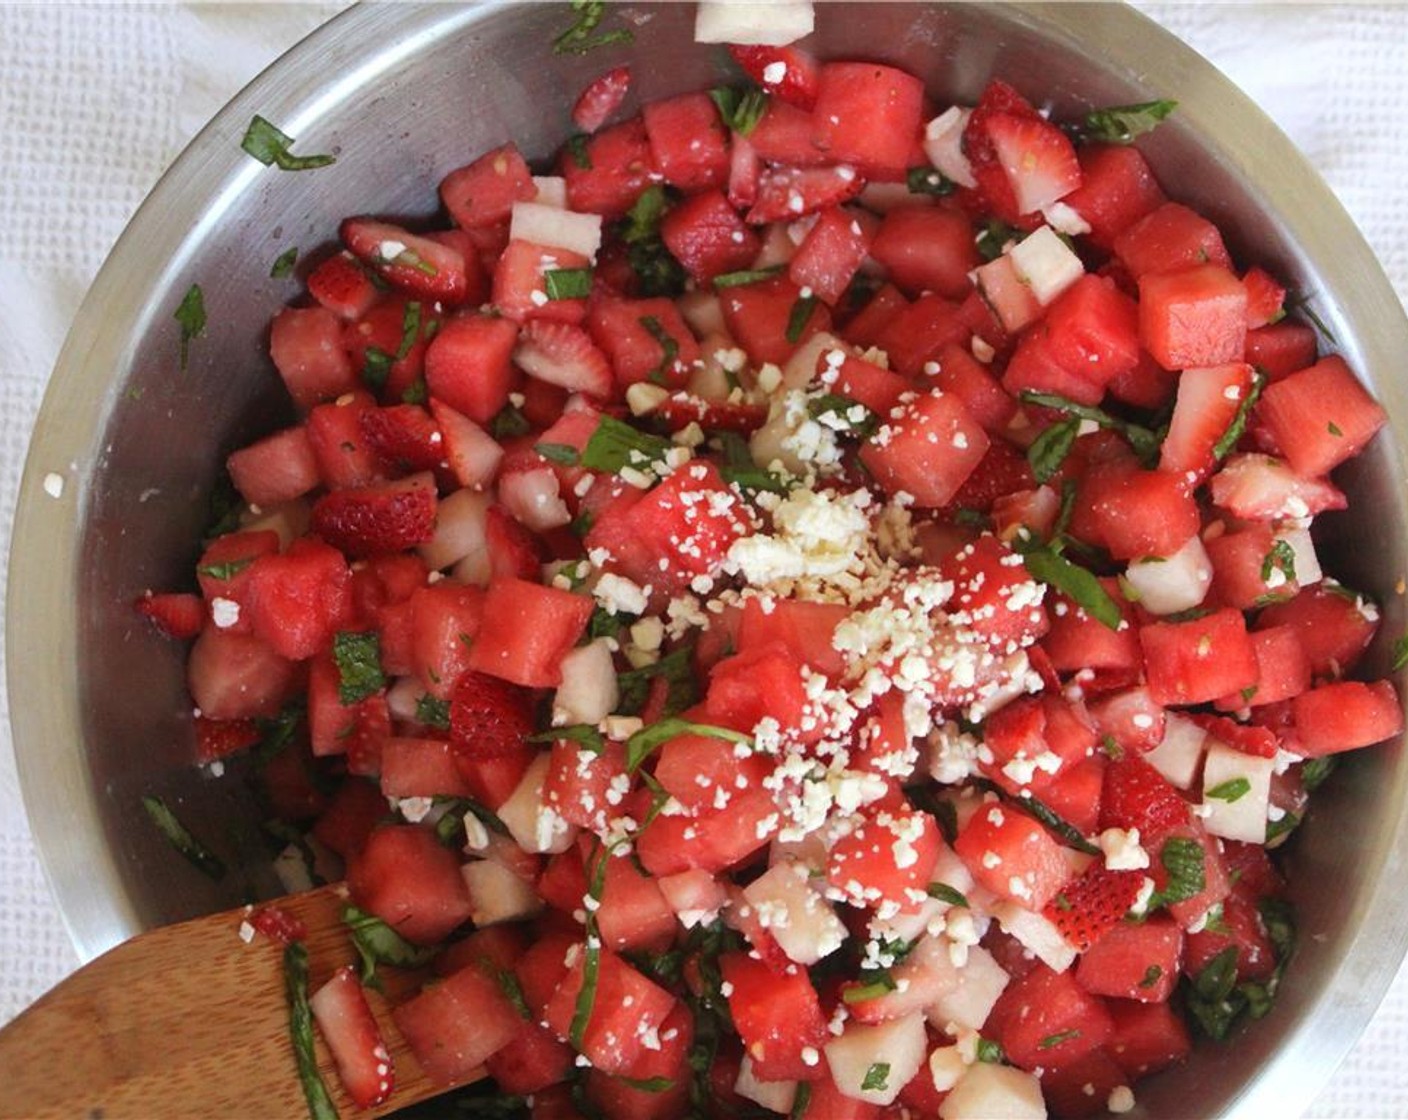 step 3 Toss the cut watermelon, jicama, and strawberries with the chopped mint, basil, and juice from Lemon (1).